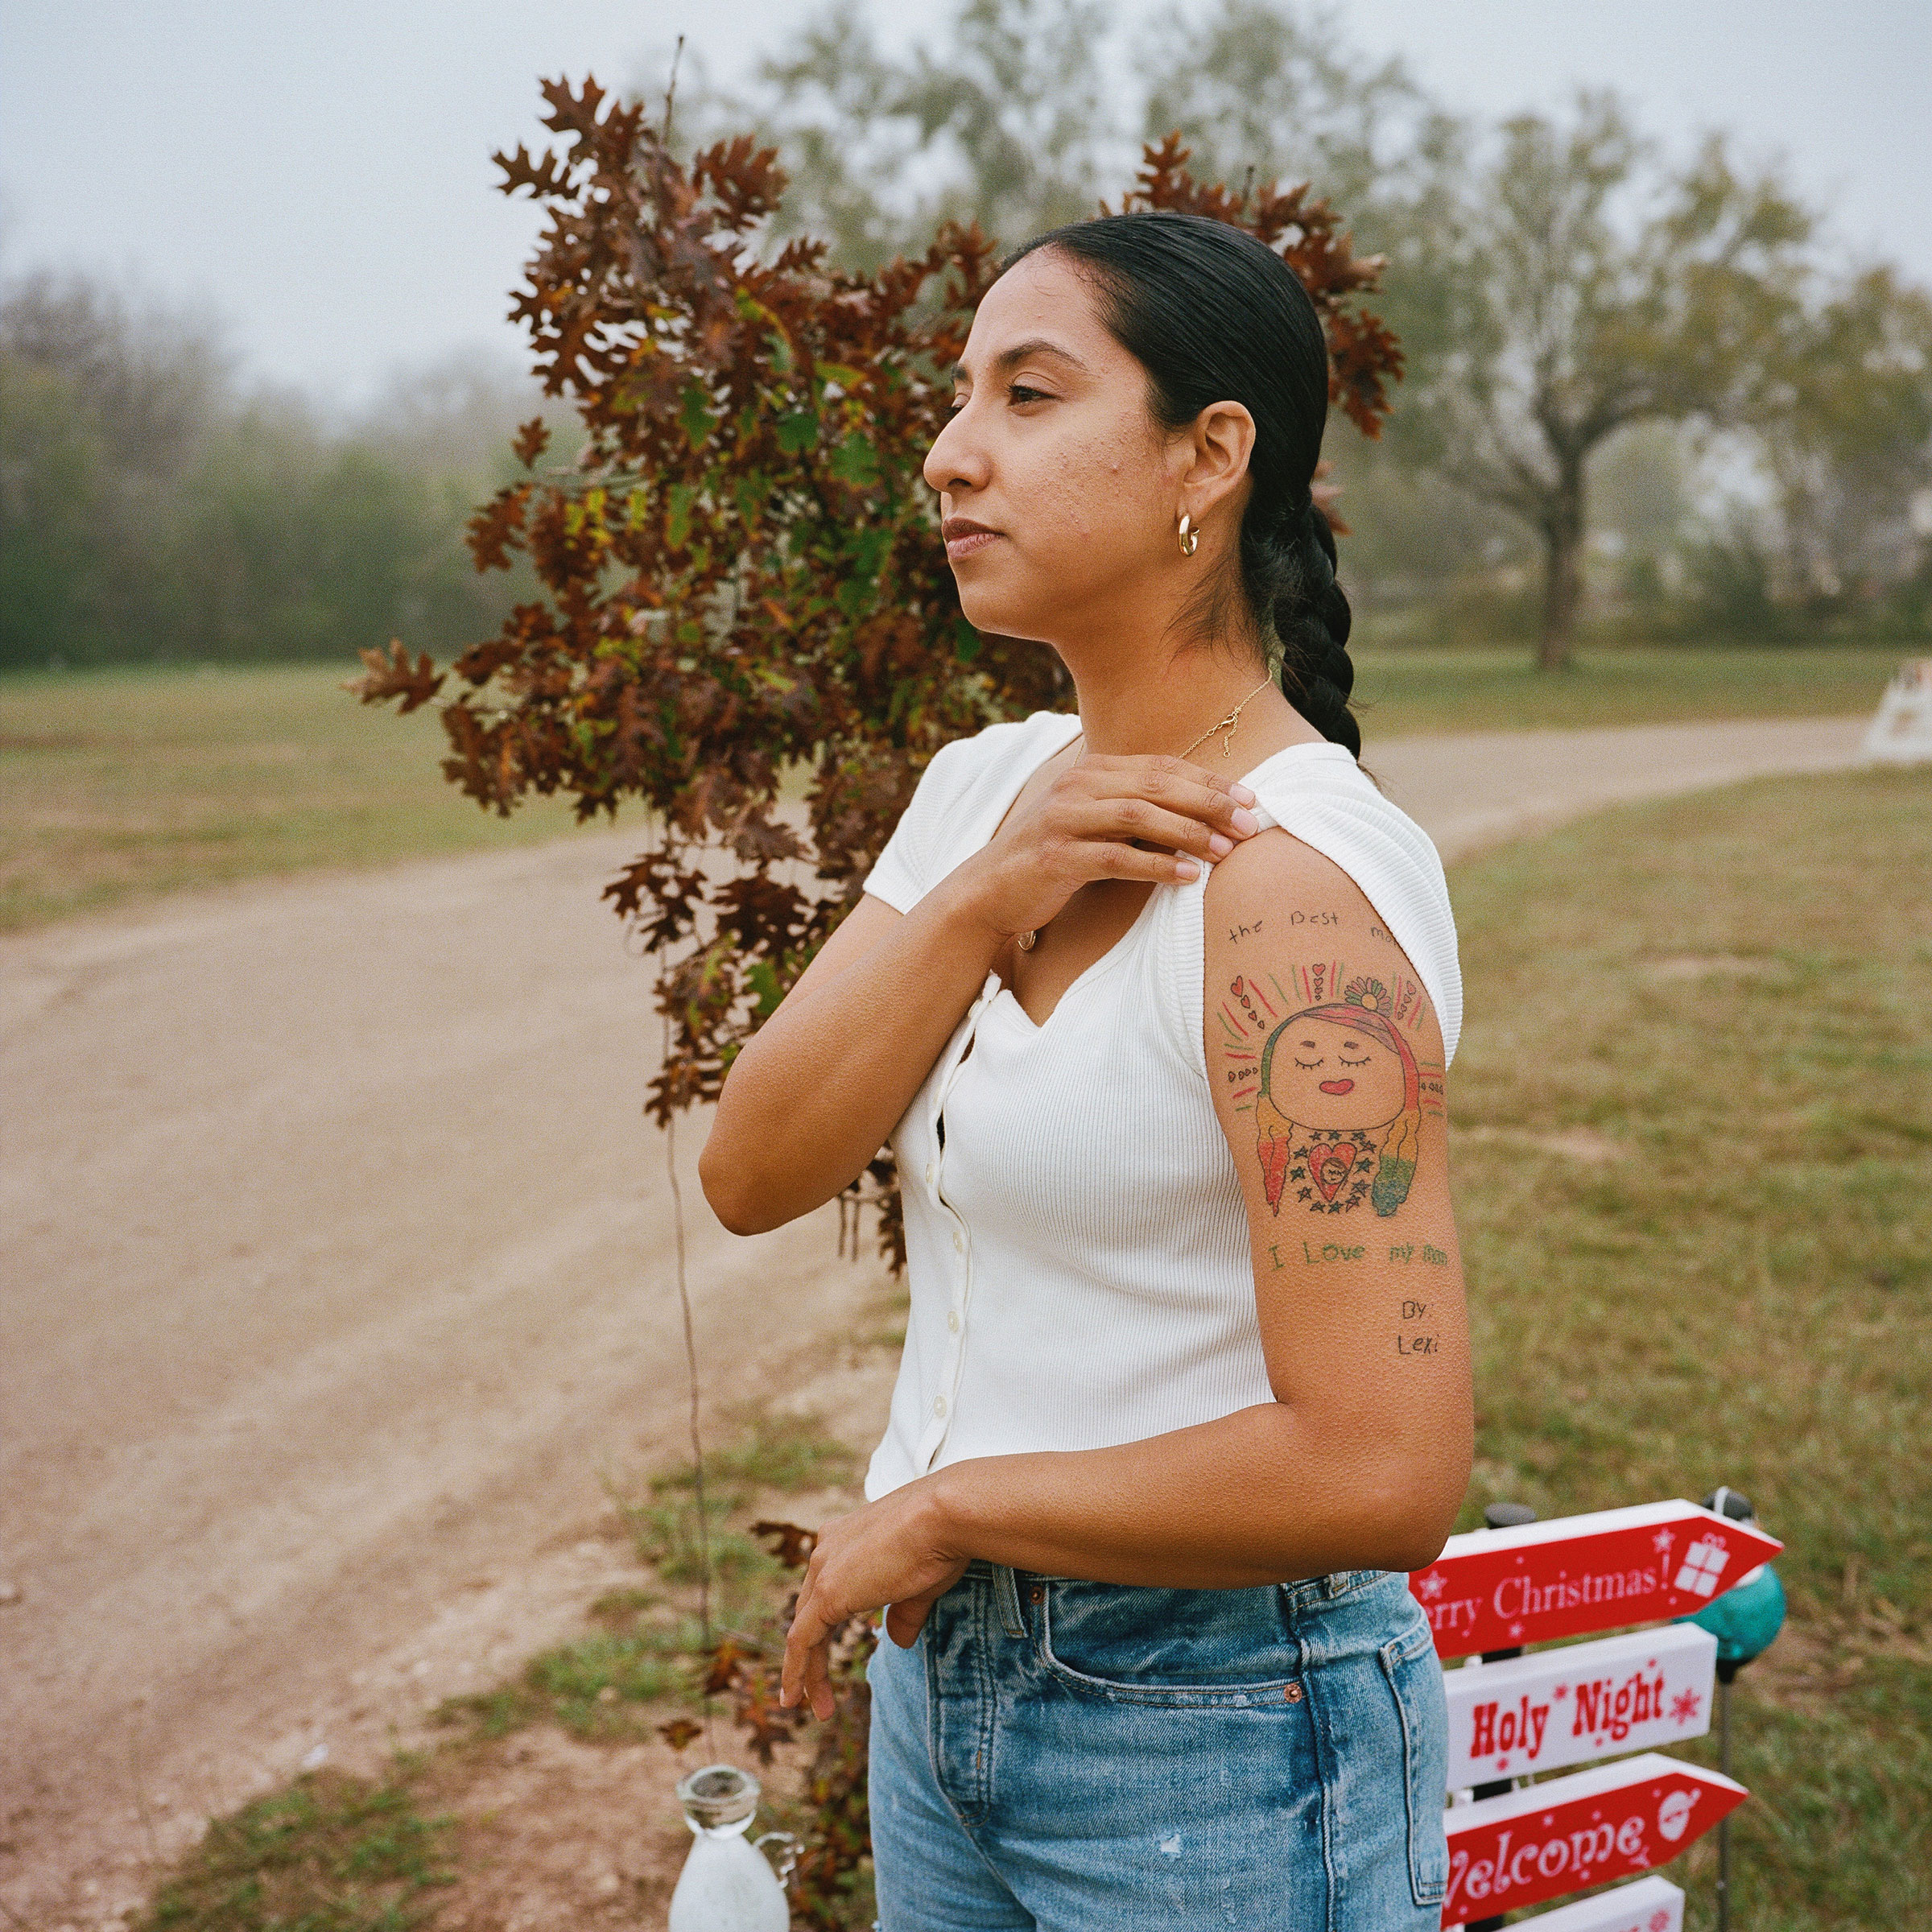 Kimberly Mata-Rubio, the mother of Lexi Rubio, shows a tattoo of a drawing by Lexi that she got in honor of her in Uvlade, Texas on Dec. 12, 2022. (Christopher Lee for TIME)